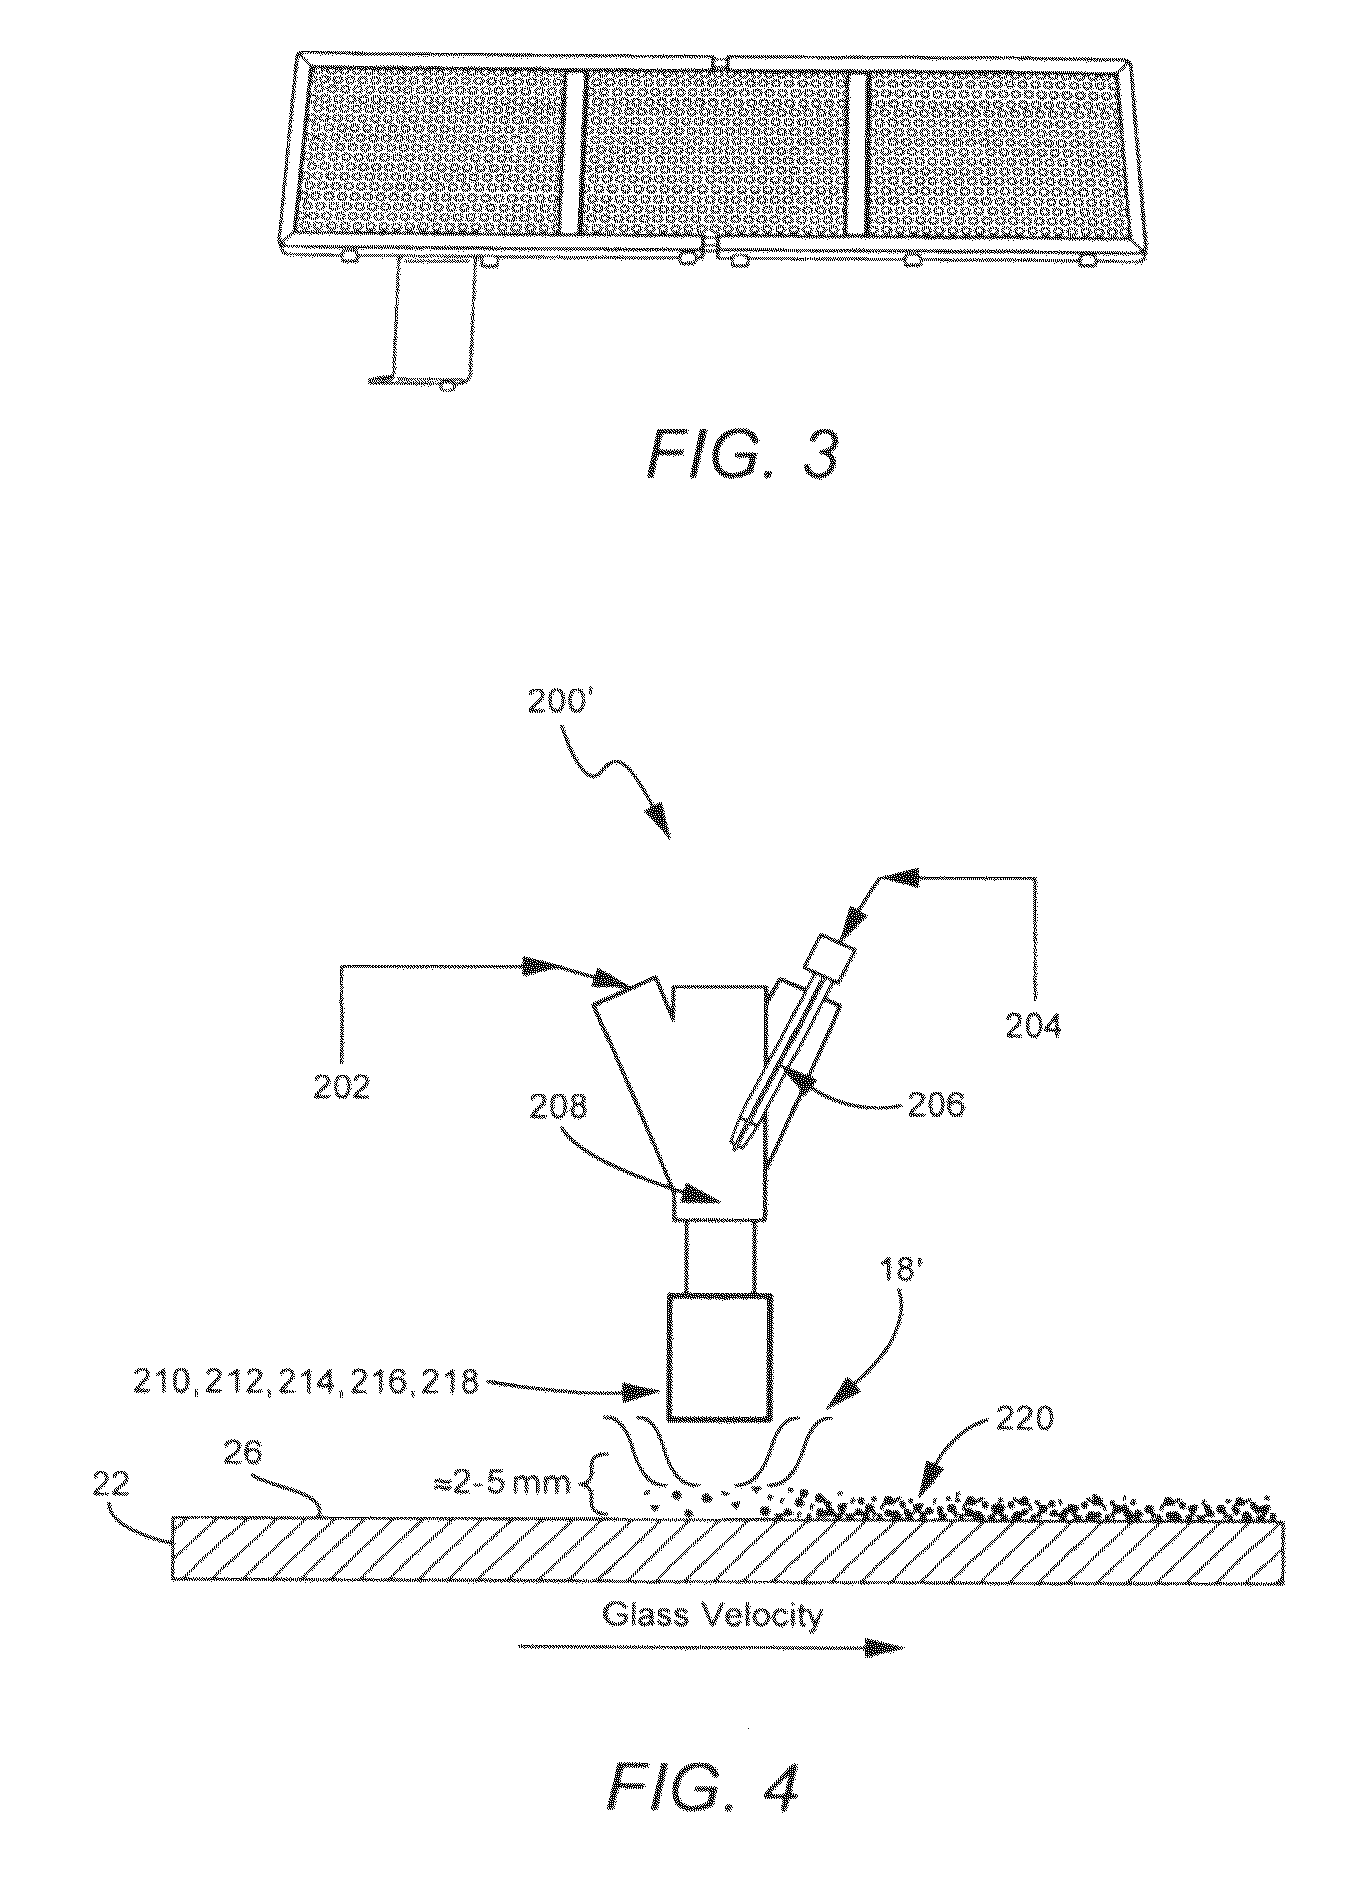 Remote combustion deposition burner and/or related methods